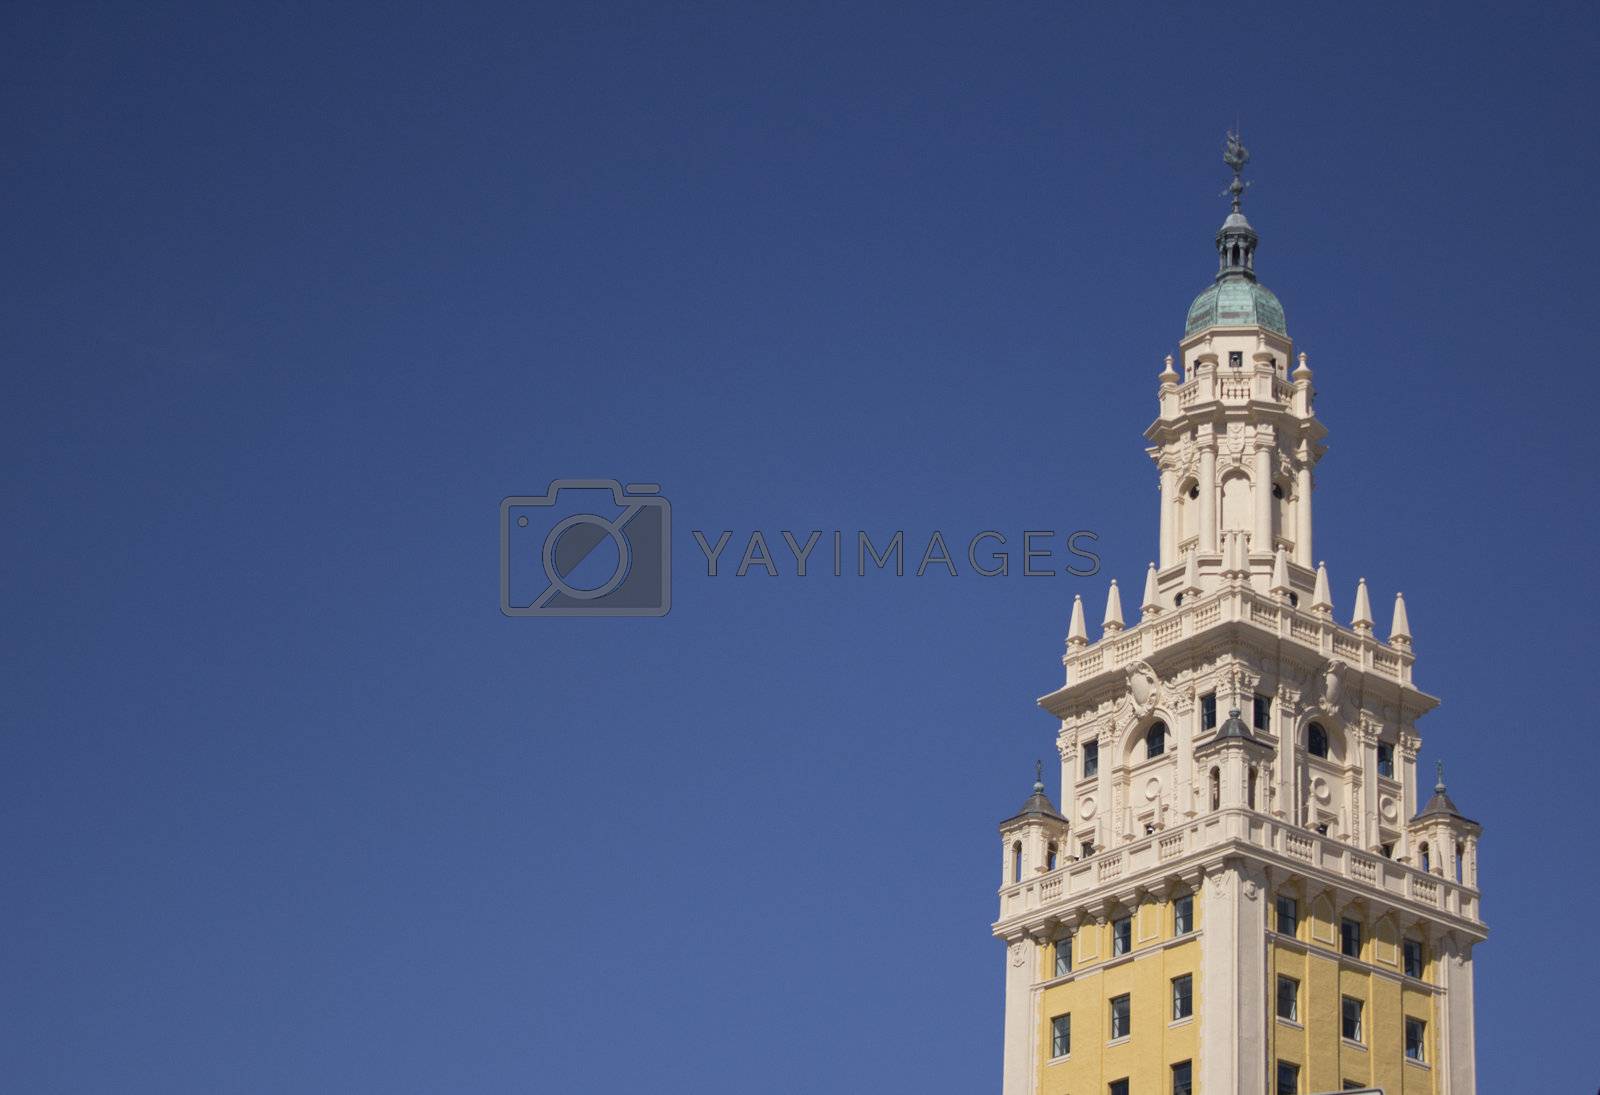 Royalty free image of Office Buildings or Condos with a blue sky by jeremywhat